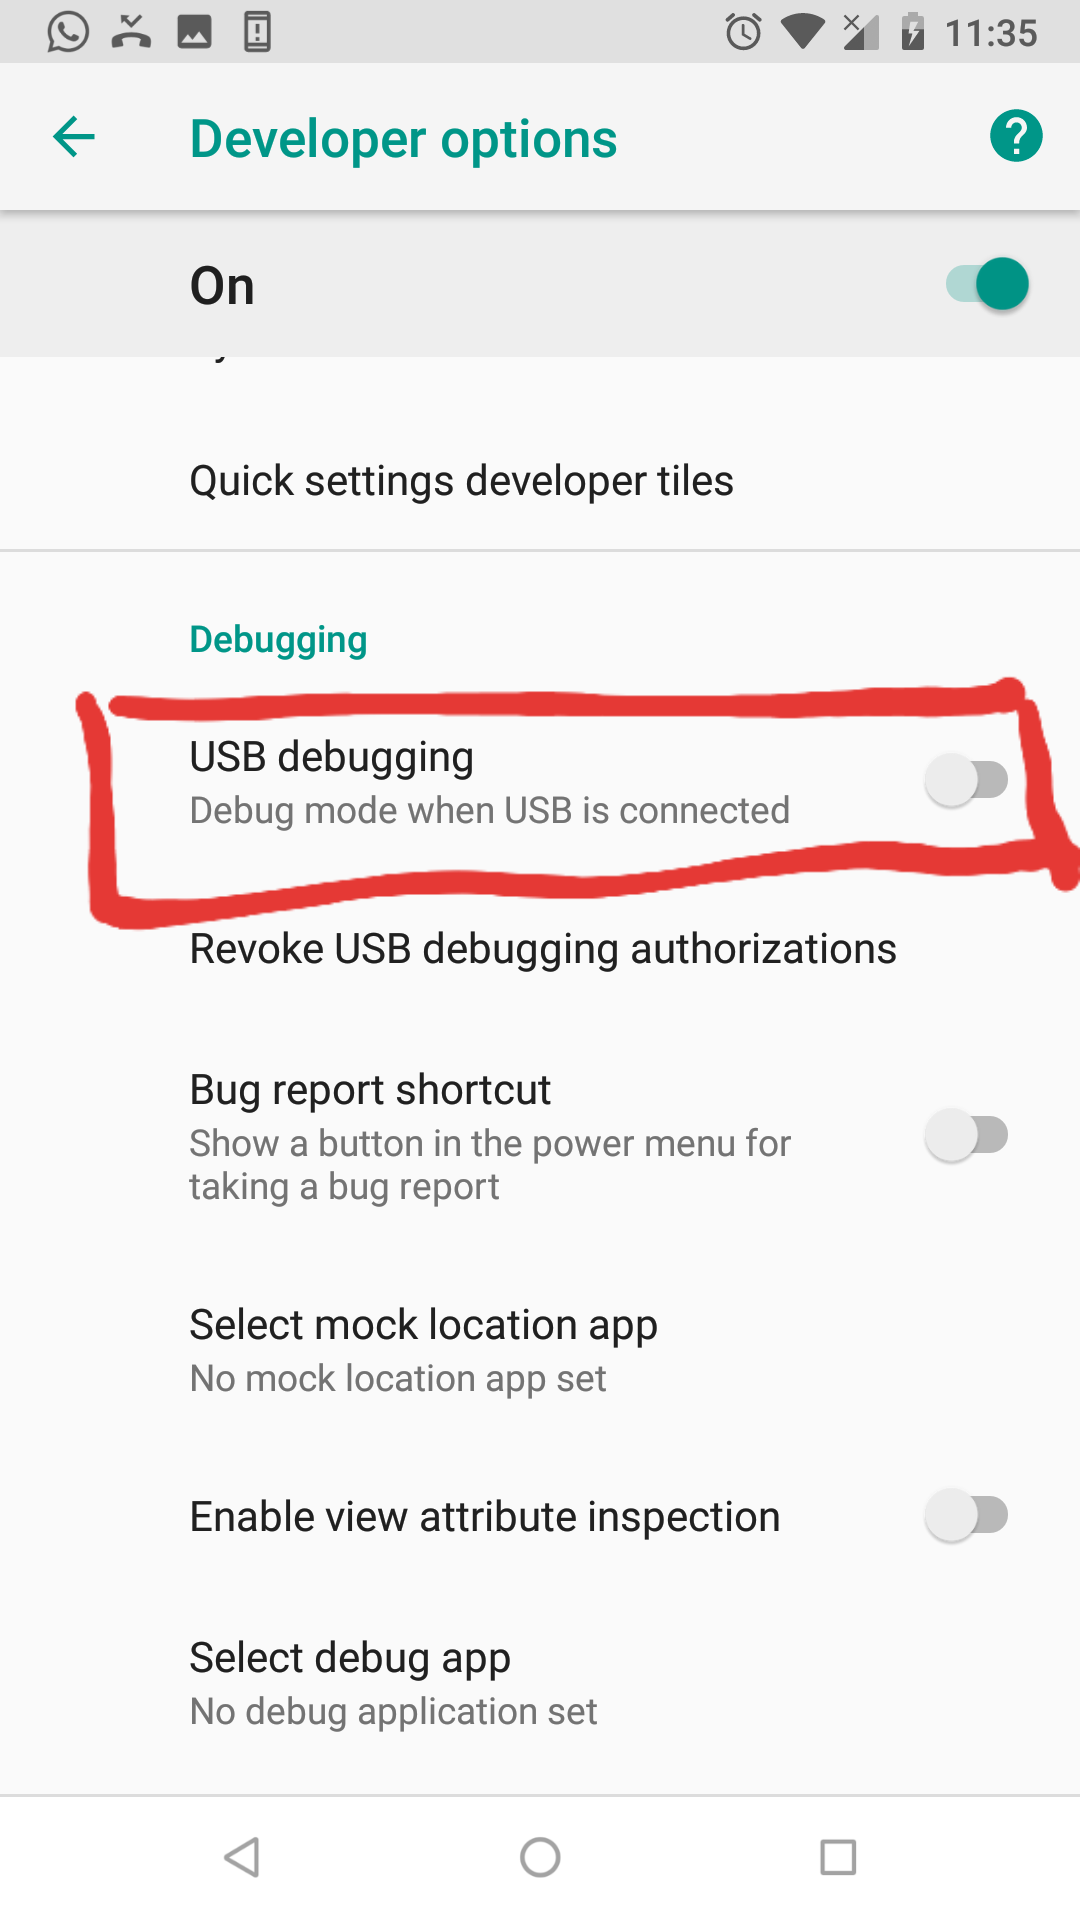 Cara Mengaktifkan Opsi Pengembang untuk Proyek Android Studio "width =" 1080 "height =" 1920 "srcset =" https://krispitech.com/wp-content/uploads/2020/02/How-to-turn-on- developer-options-for-android-studio-project-6.png 1080w, https://krispitech.com/wp-content/uploads/2020/02/How-to-turn-on-developer-options-for-android -studio-project-6-169x300.png 169w, https://krispitech.com/wp-content/uploads/2020/02/How-to-turn-on-developer-options-for-android-studio-project- 6-768x1365.png 768w, https://krispitech.com/wp-content/uploads/2020/02/How-to-turn-on-developer-options-for-android-studio-project-6-576x1024.png 576w, https://krispitech.com/wp-content/uploads/2020/02/How-to-turn-on-developer-options-for-android-studio-project-6-696x1237.png 696w, https: / /krispitech.com/wp-content/uploads/2020/02/How-to-turn-on-developer-options-for-android-studio-project-6-1068x1899.png 1068w, https://krispitech.com/ wp-content / uploads / 2020/02 / Bagaimana-untuk-mengaktifkan-pengembang-opsi-untuk-android-studio-project-6-236x420.png 236w "size =" (max-width: 1080px) 100vw, 1080px